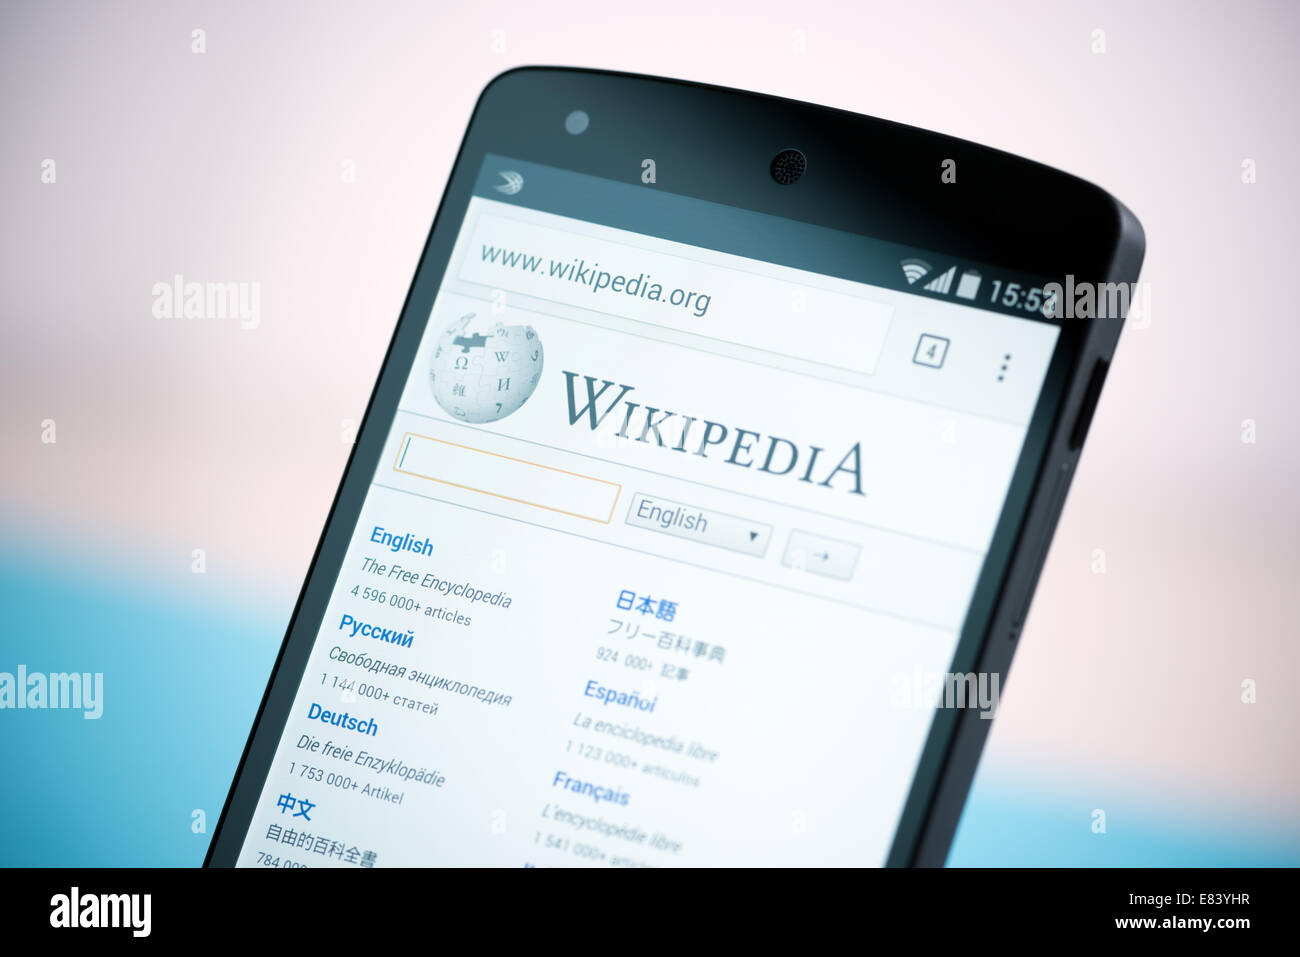 Close-up shot of brand new Google Nexus 5, powered by Android 4.4 version, with Wikipedia website homepage on a screen. Stock Photo